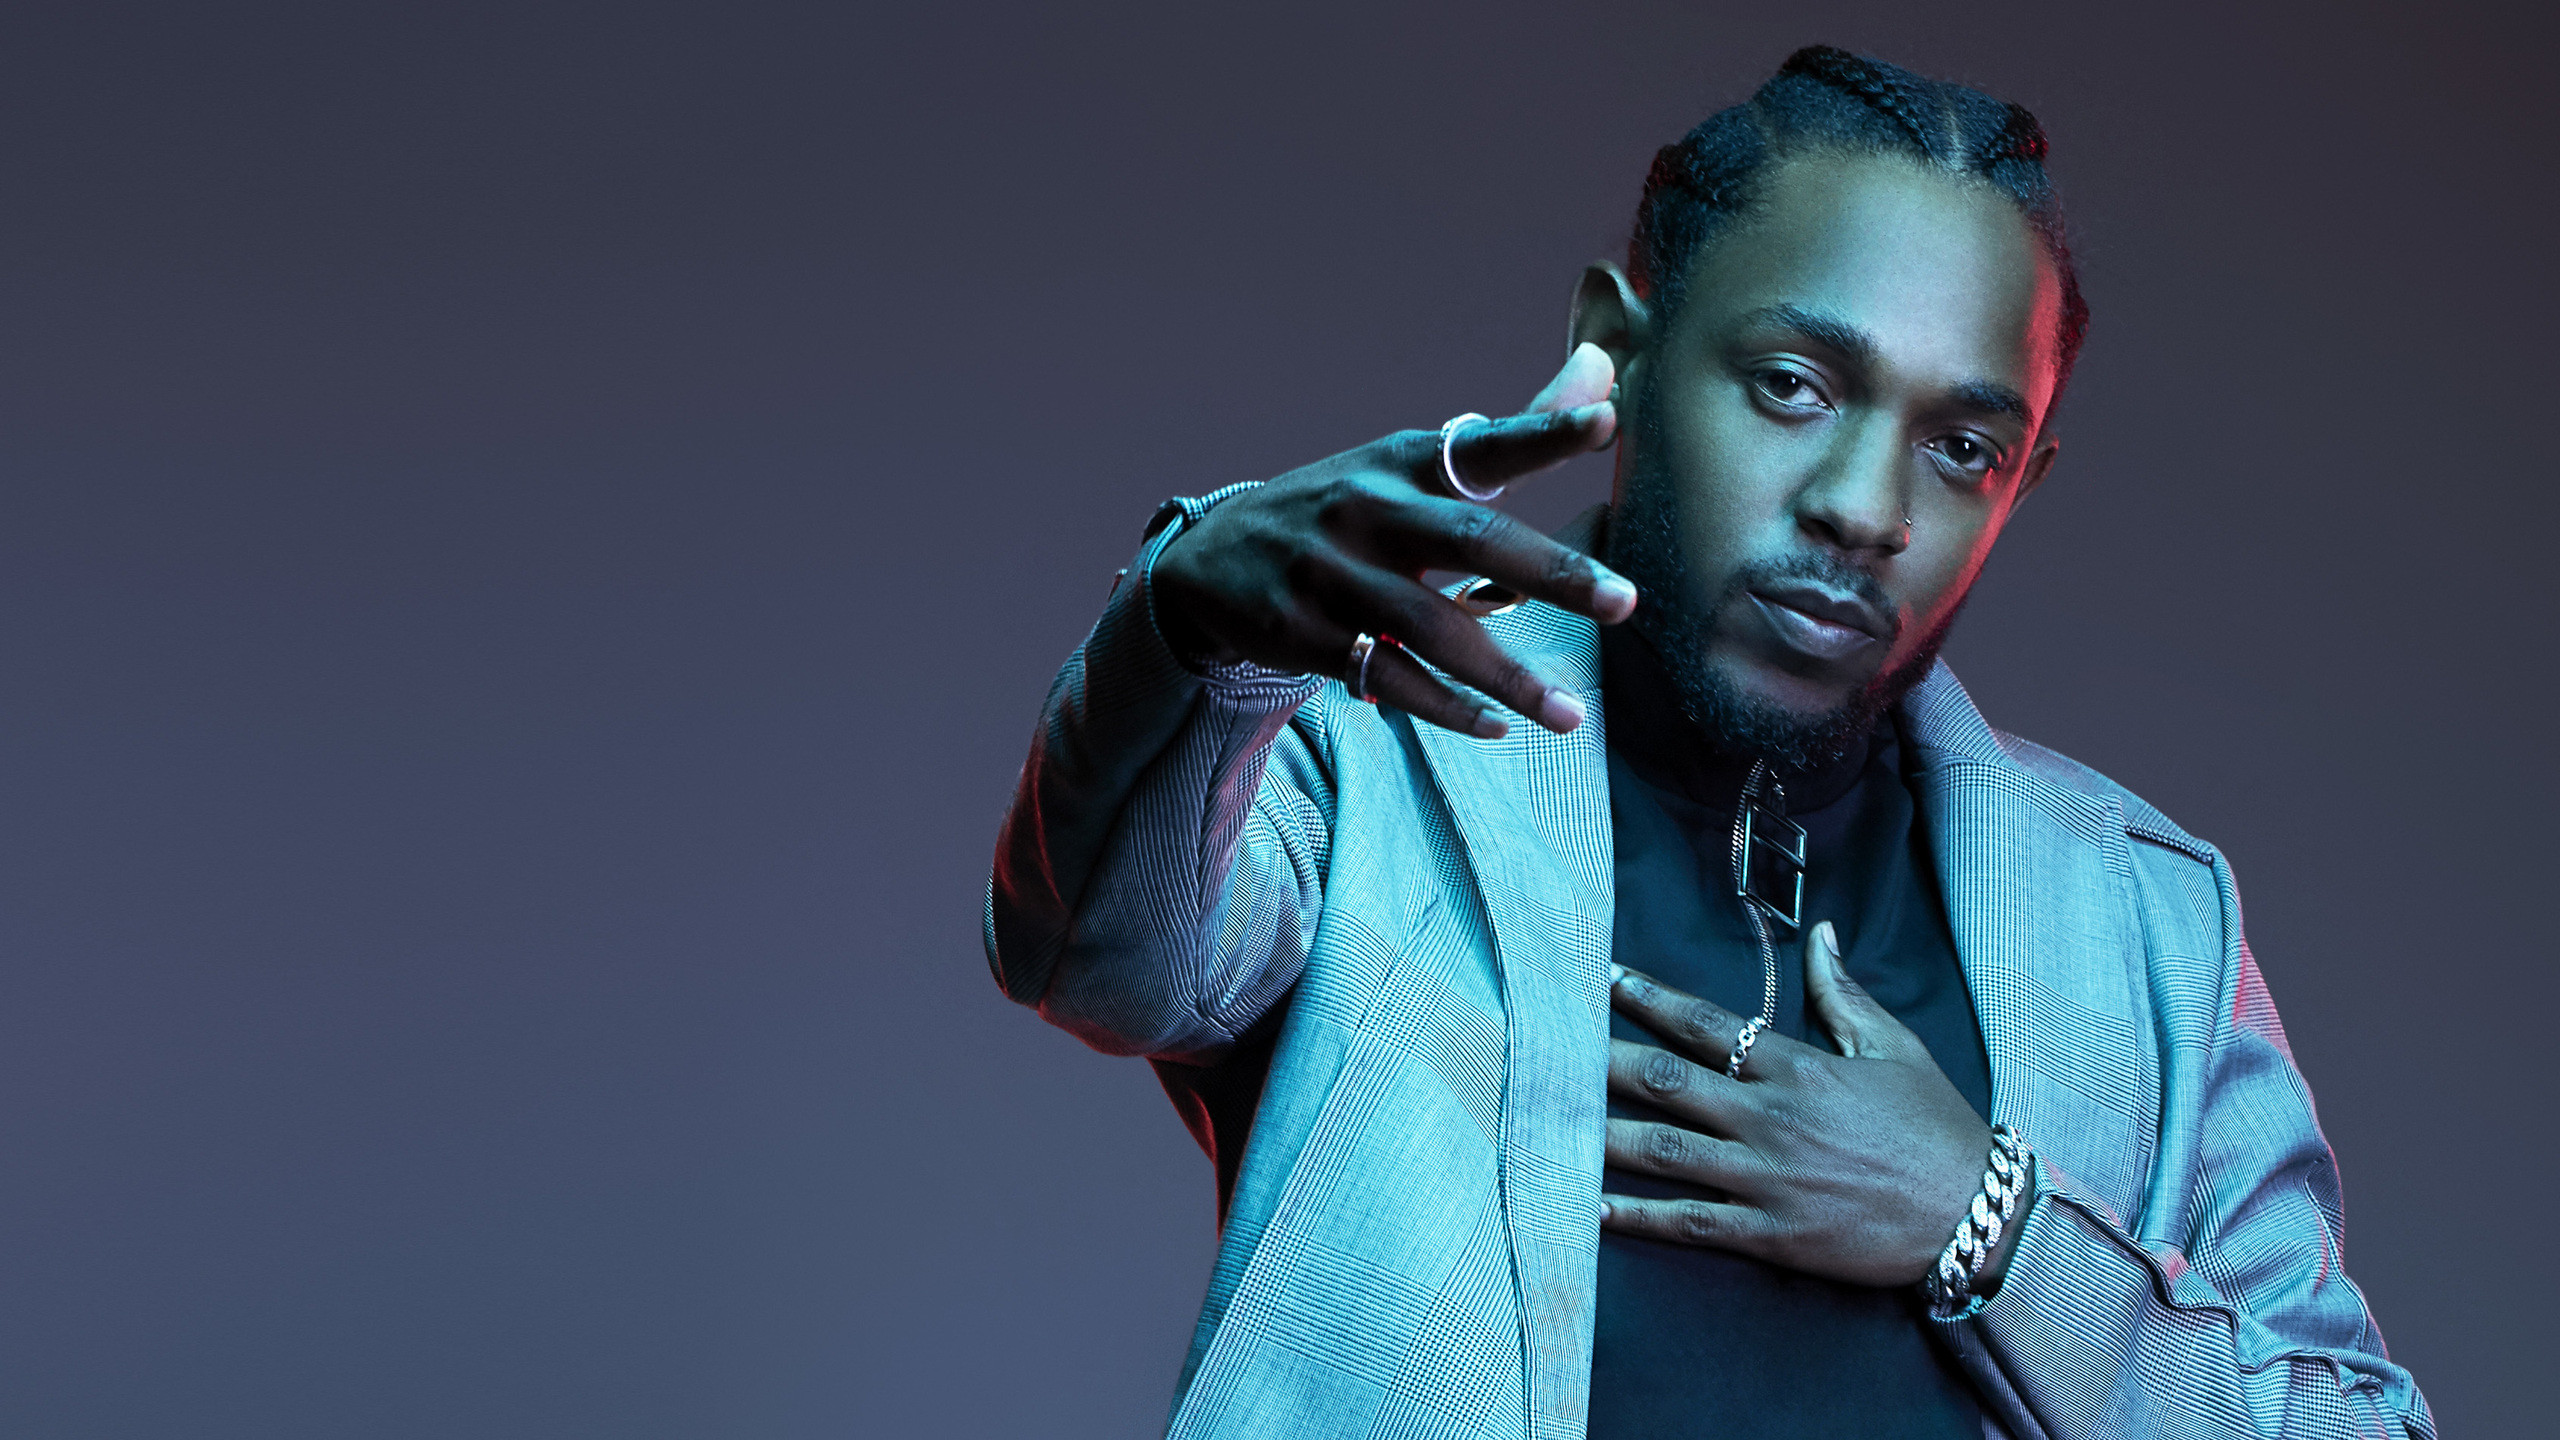 X kendrick lamar k p resolution hd k wallpapers images backgrounds photos and pictures